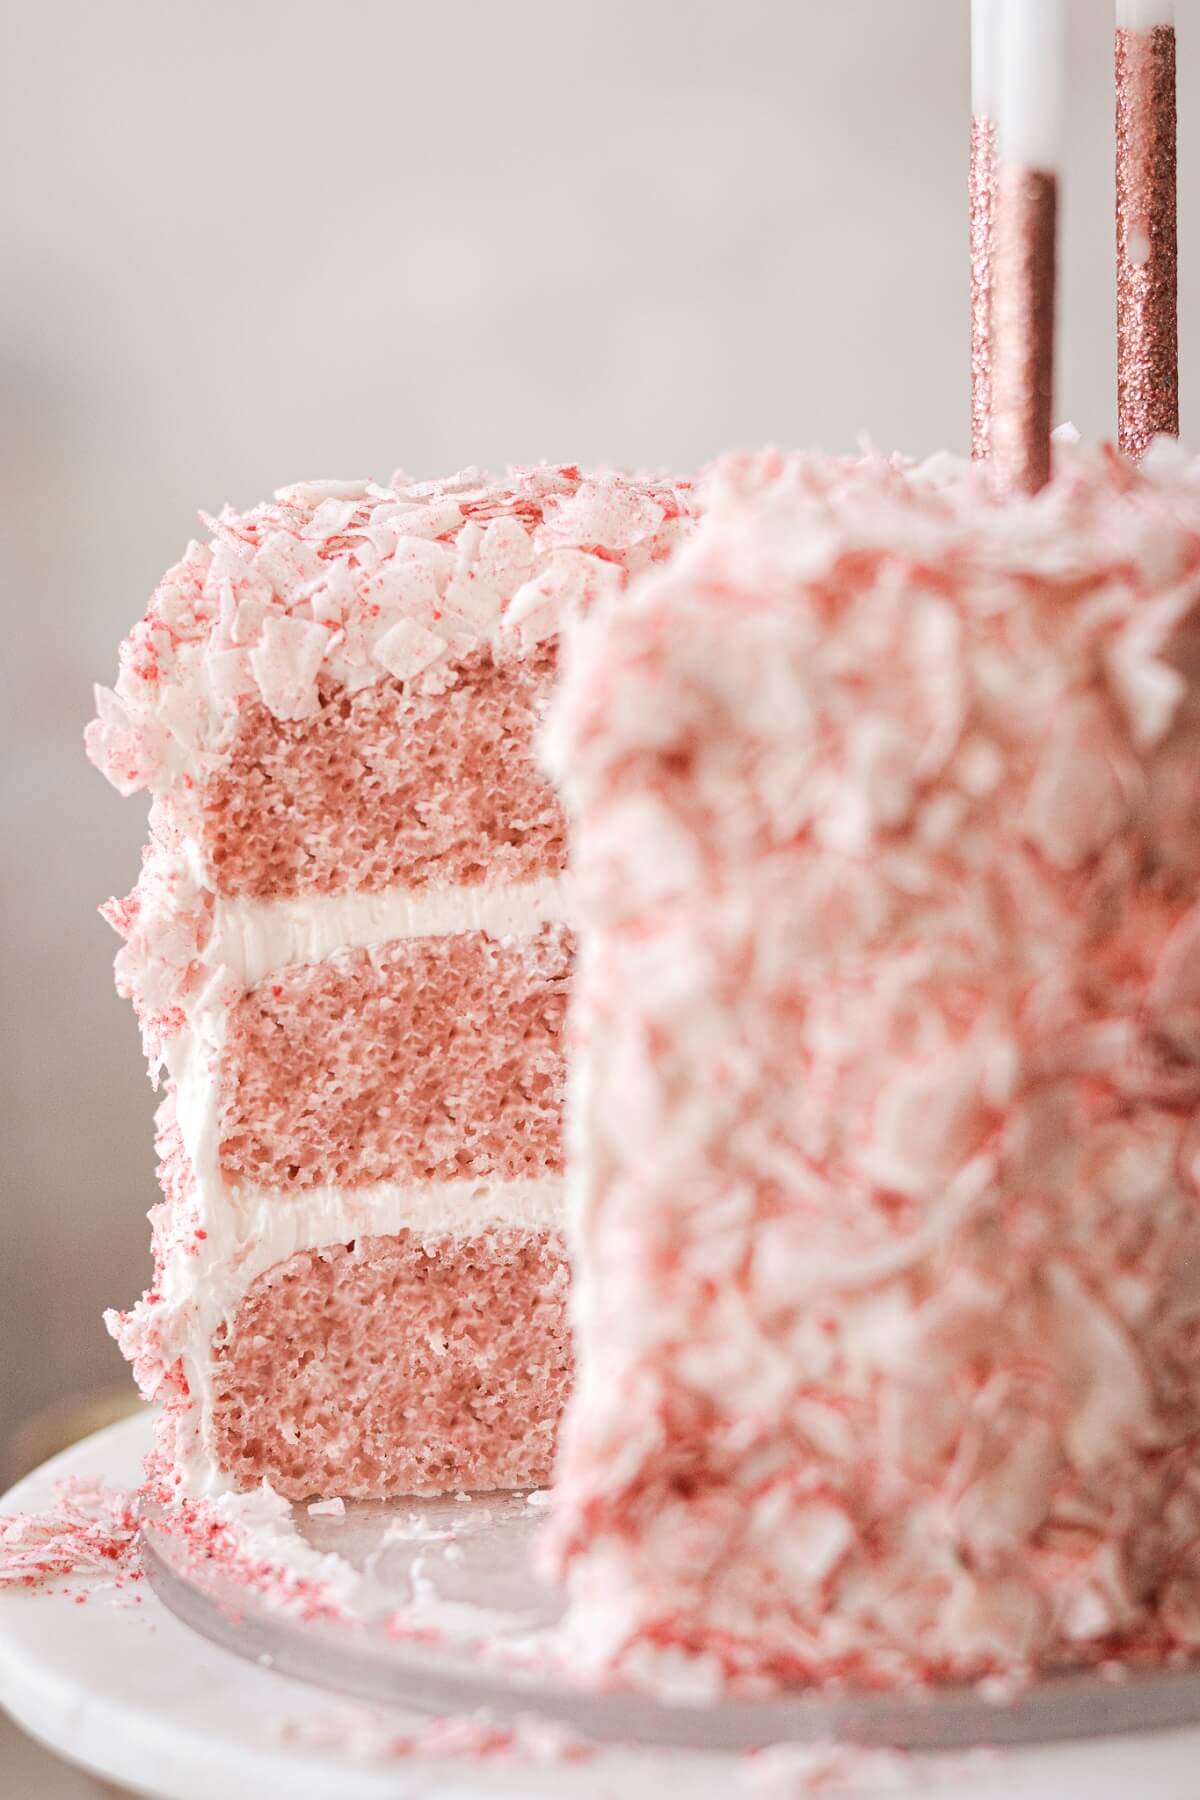 Strawberry coconut cake with a slice cut.